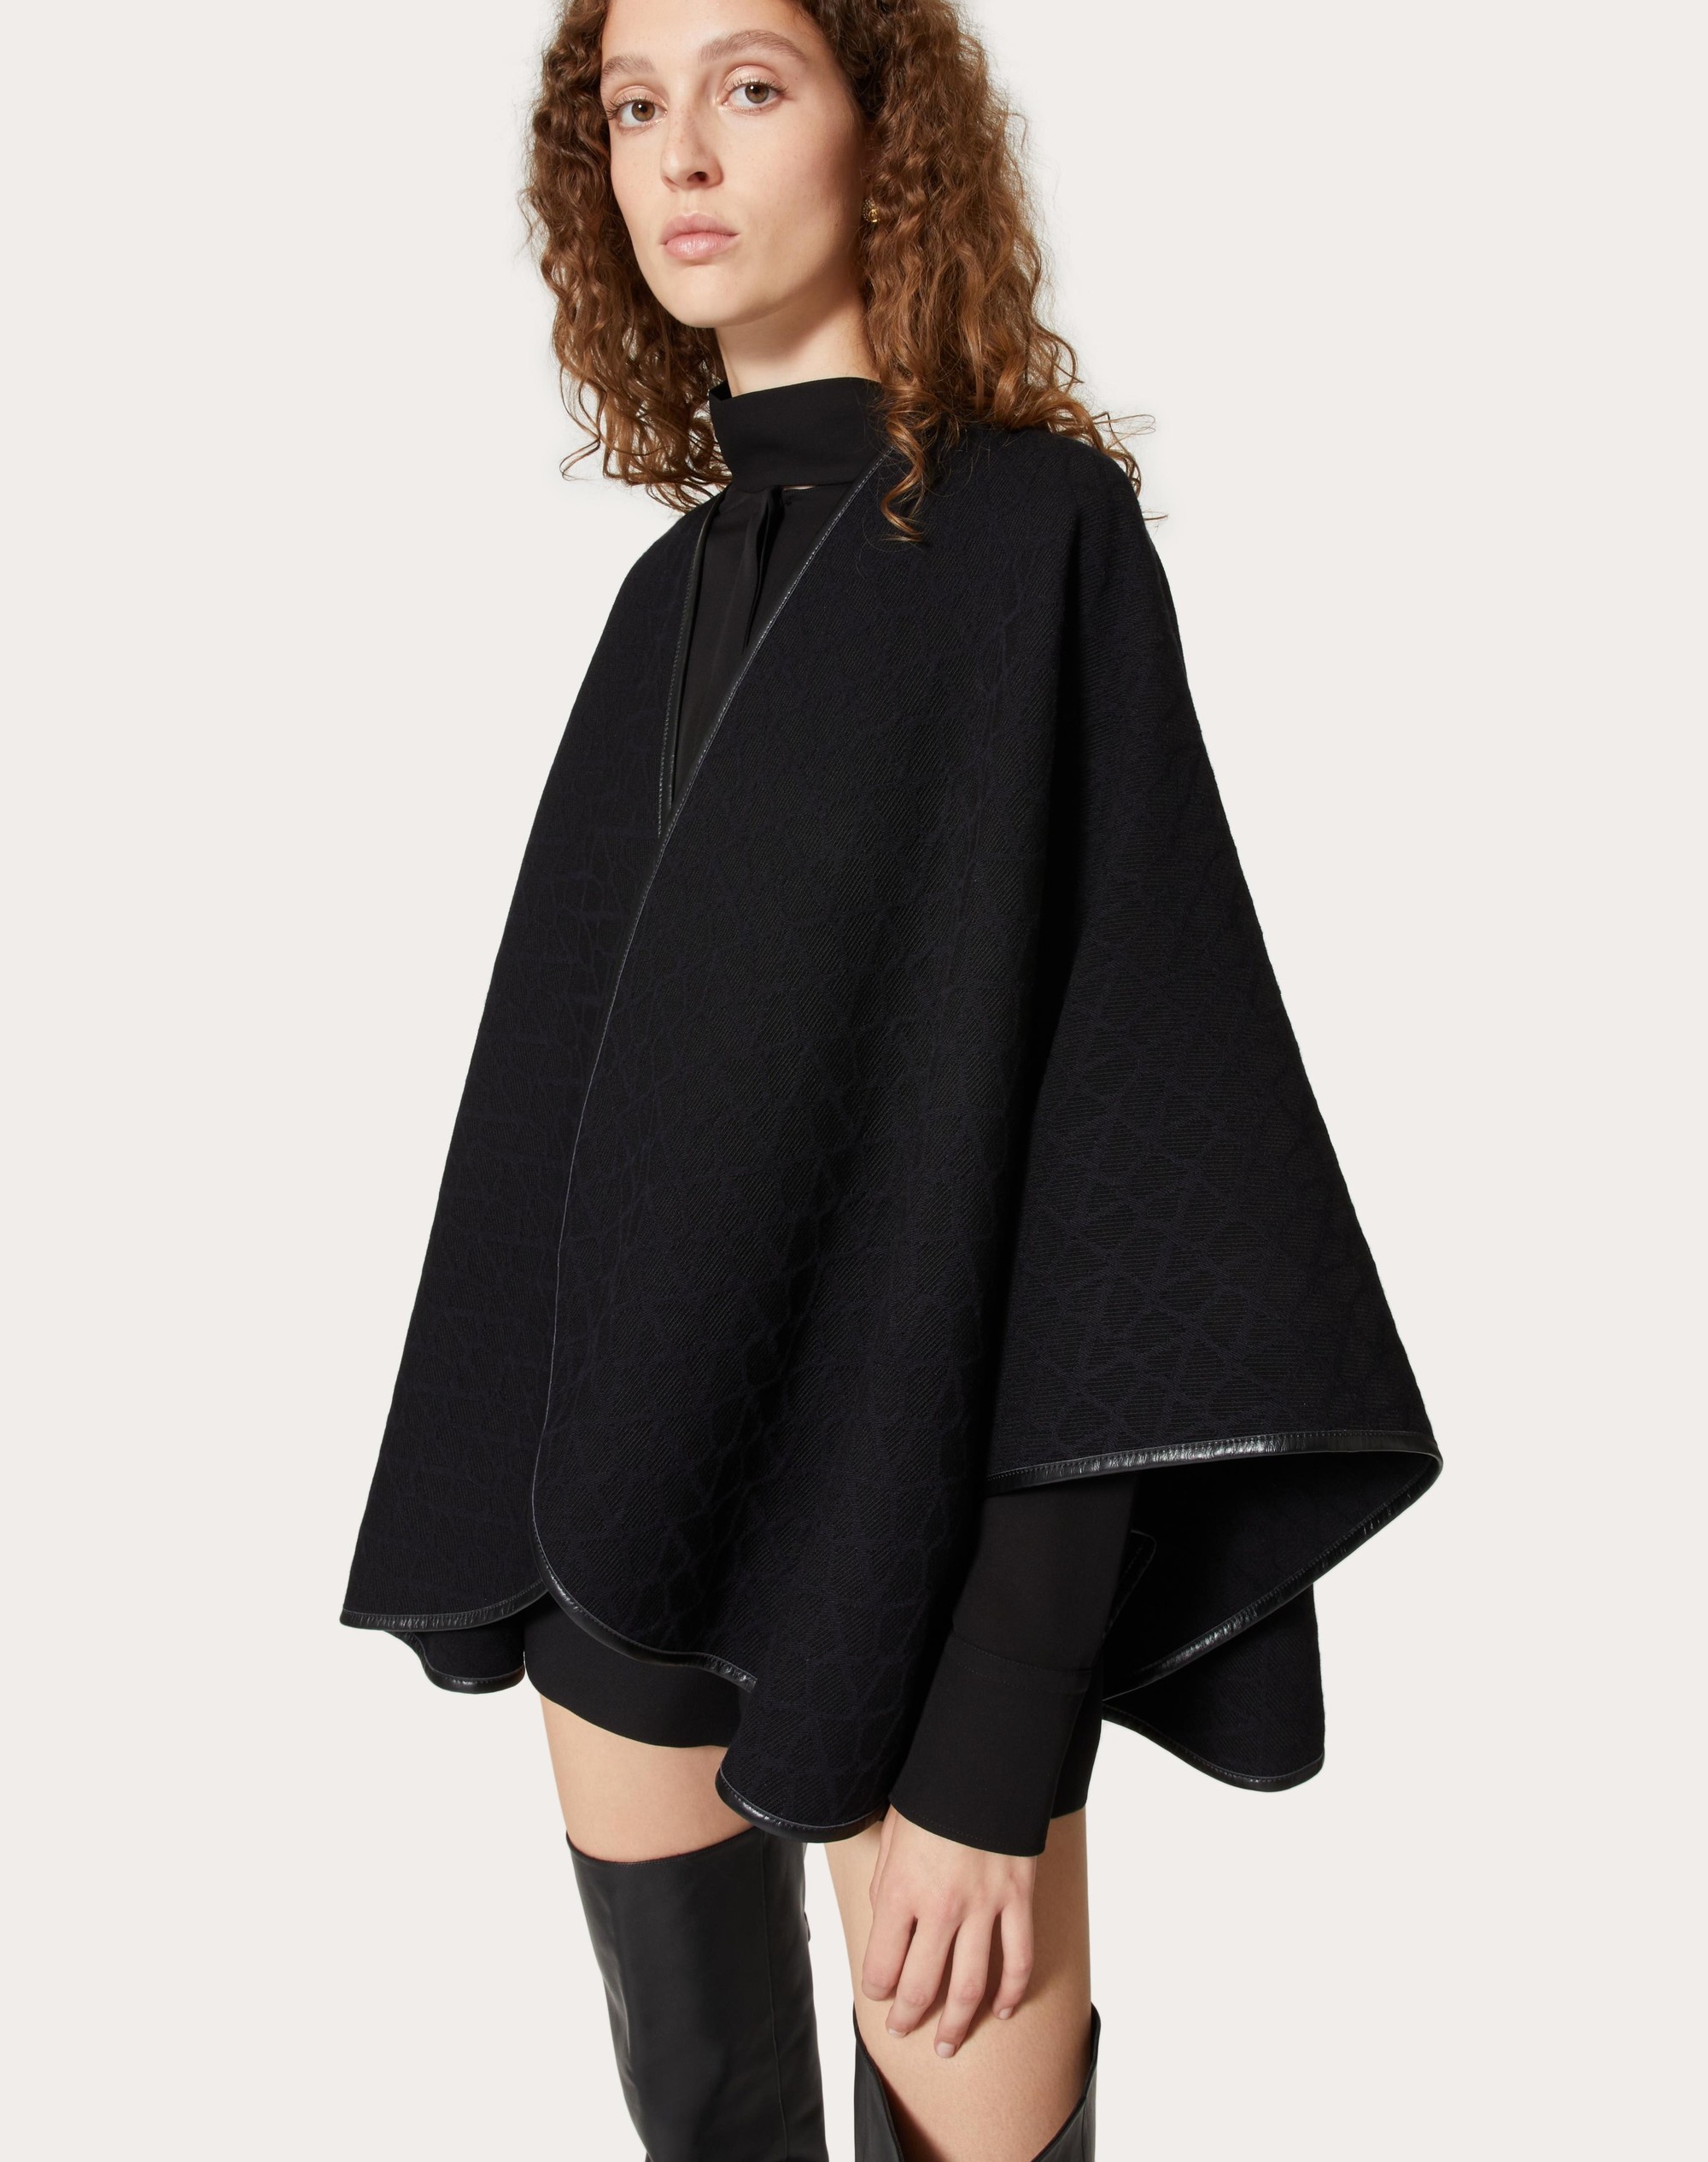 TOILE ICONOGRAPHE WOOL PONCHO WITH LEATHER TRIM - 4